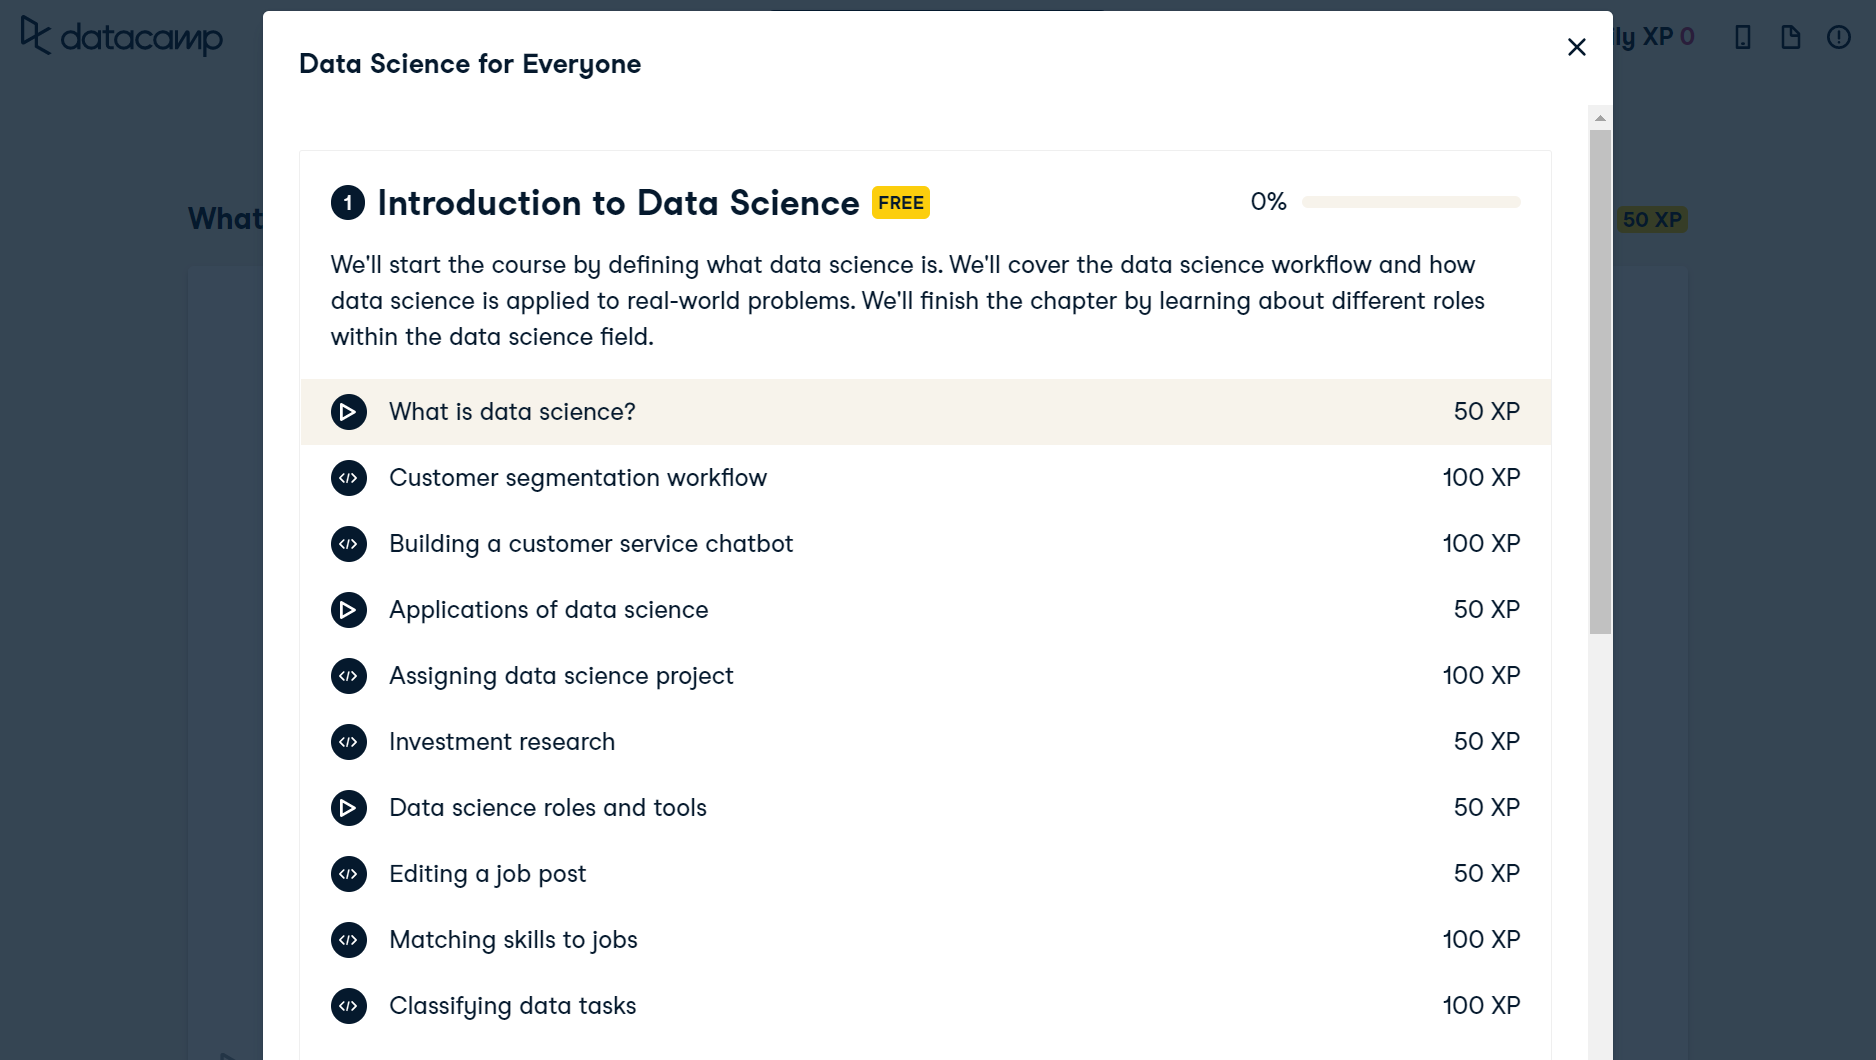 The Introduction to Data Science course description in DataCamp.